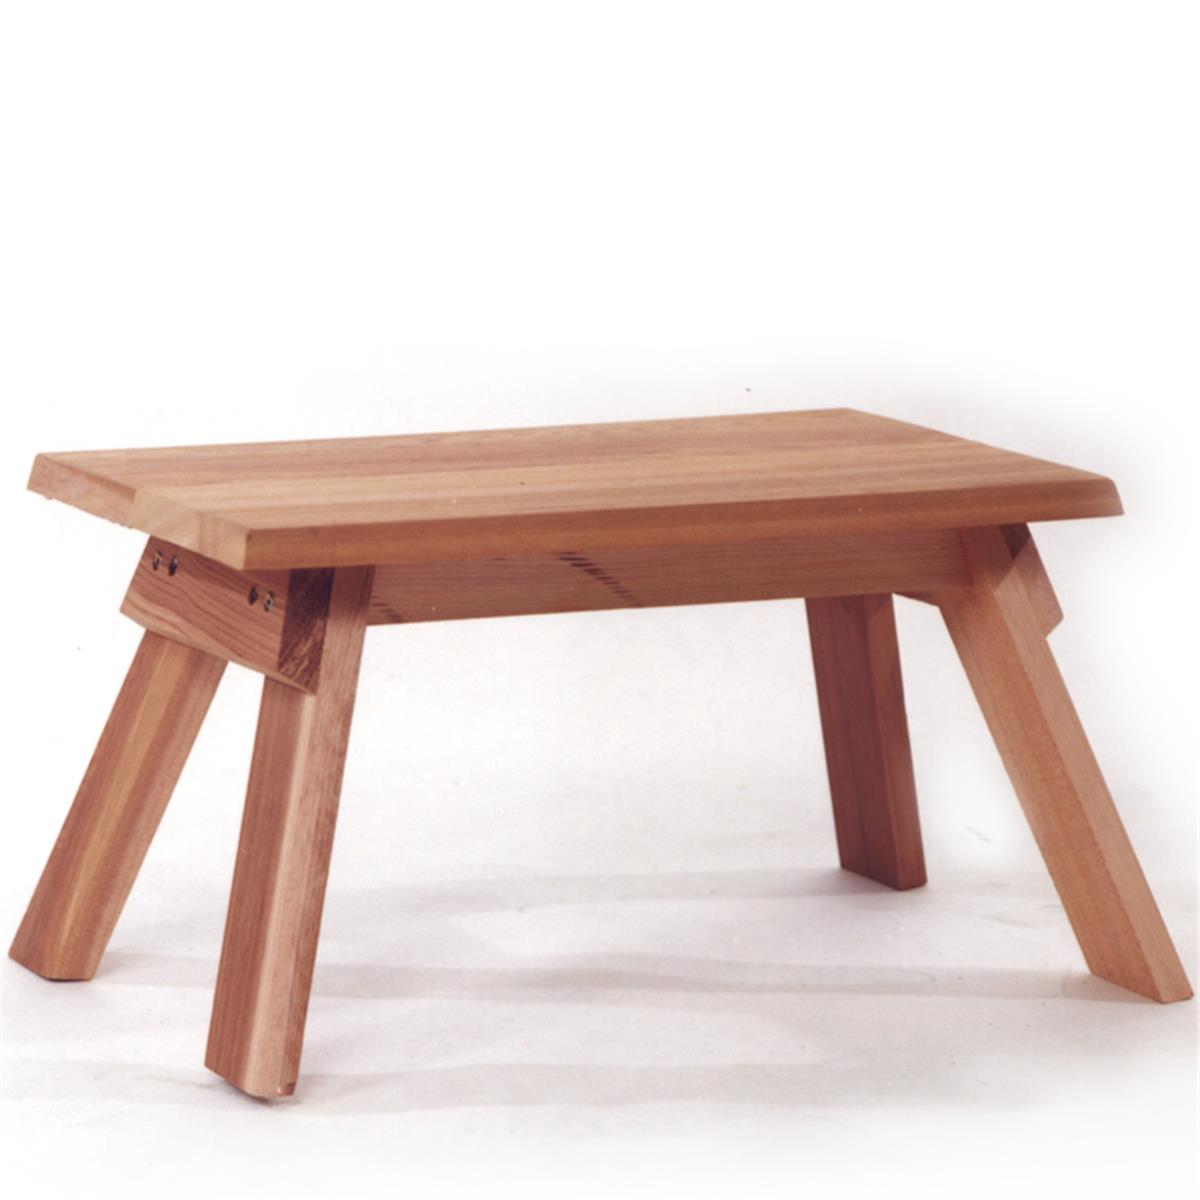 Picture of All Things Cedar CF18 Cedar Footstool for the Backyard Deck